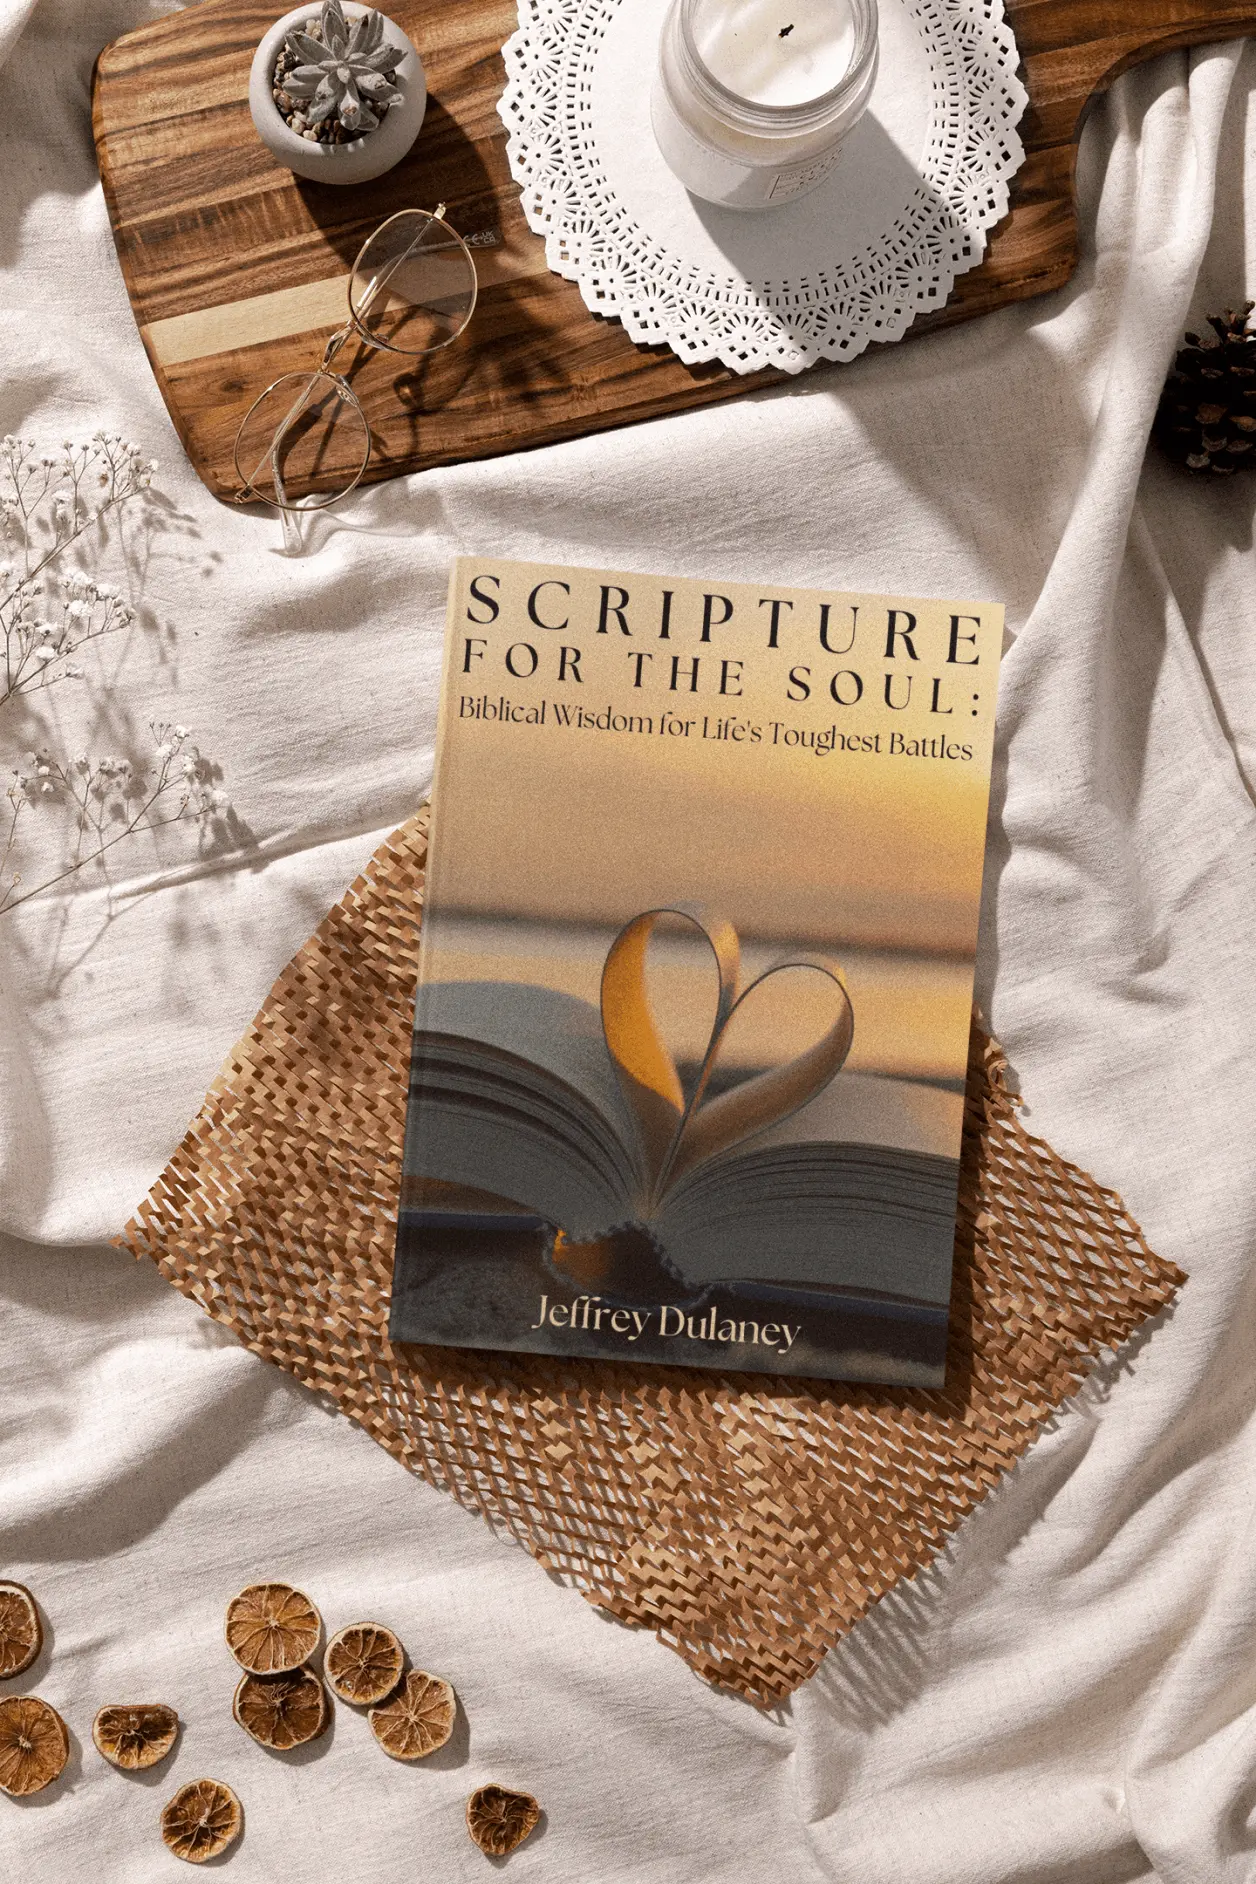 Scripture for the Soul: By Jeffrey Dulaney